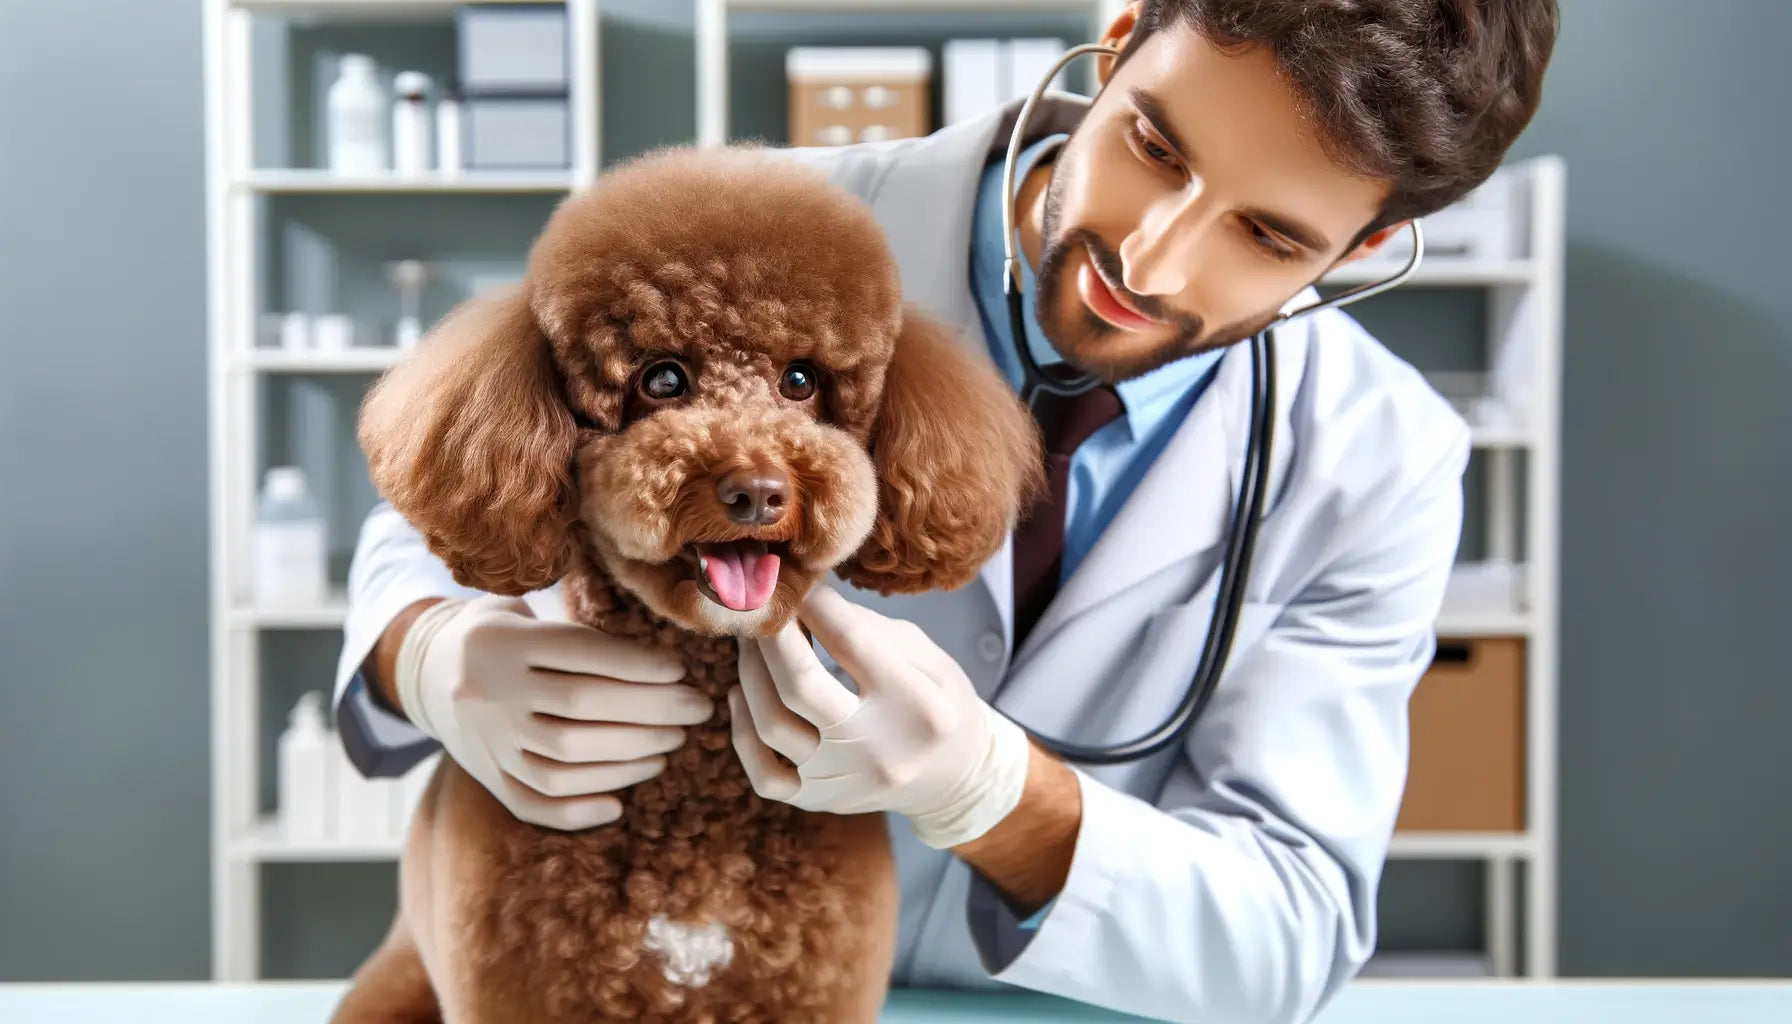 A brown Poodle at a veterinary clinic receiving a health check-up.